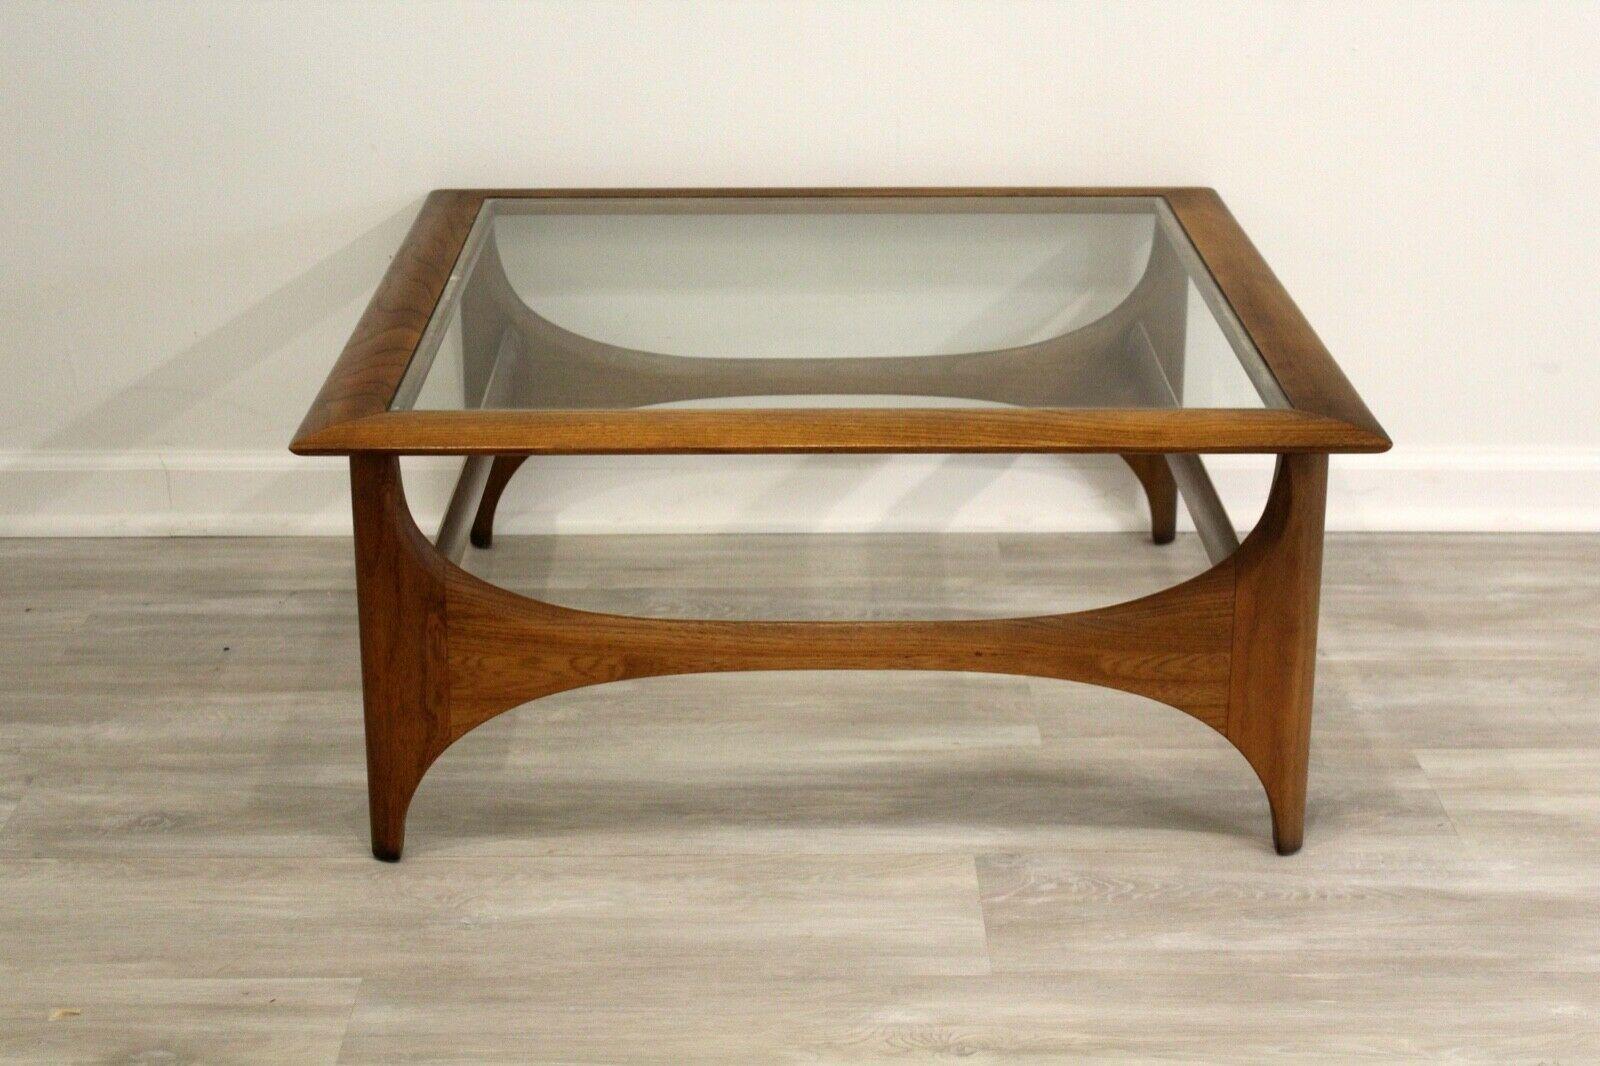 A beautiful walnut wood sculptural side or end table by Lane, in great condition. Dimensions: 32 W x 32 D x 14 H.
 